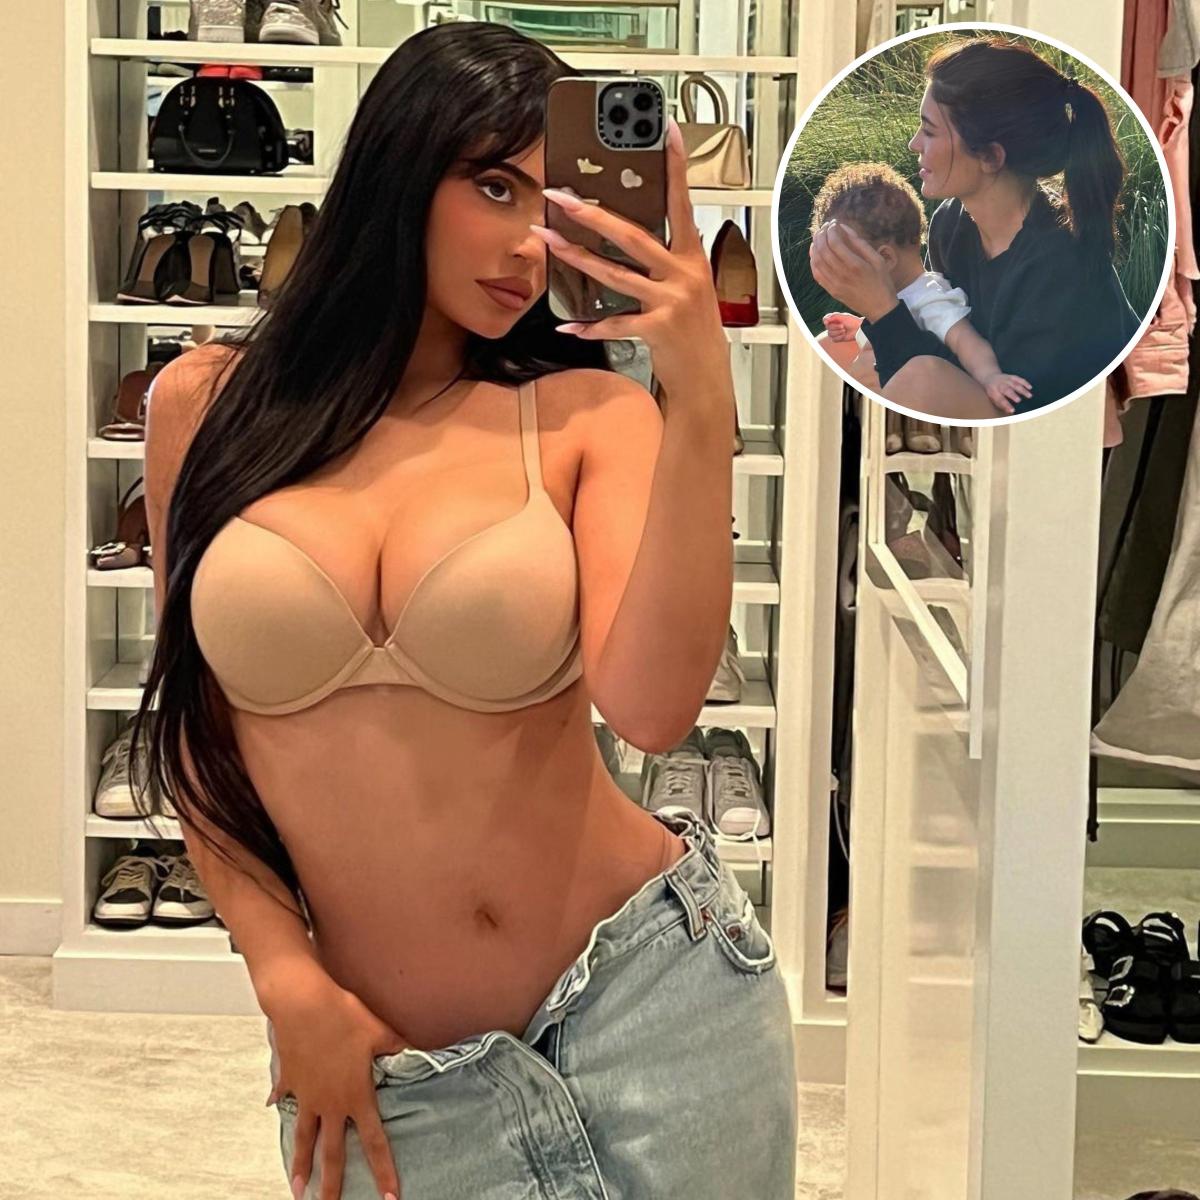 Kylie Jenner hides behind security blanket in Calvin Klein ad — and Twitter  has theories why